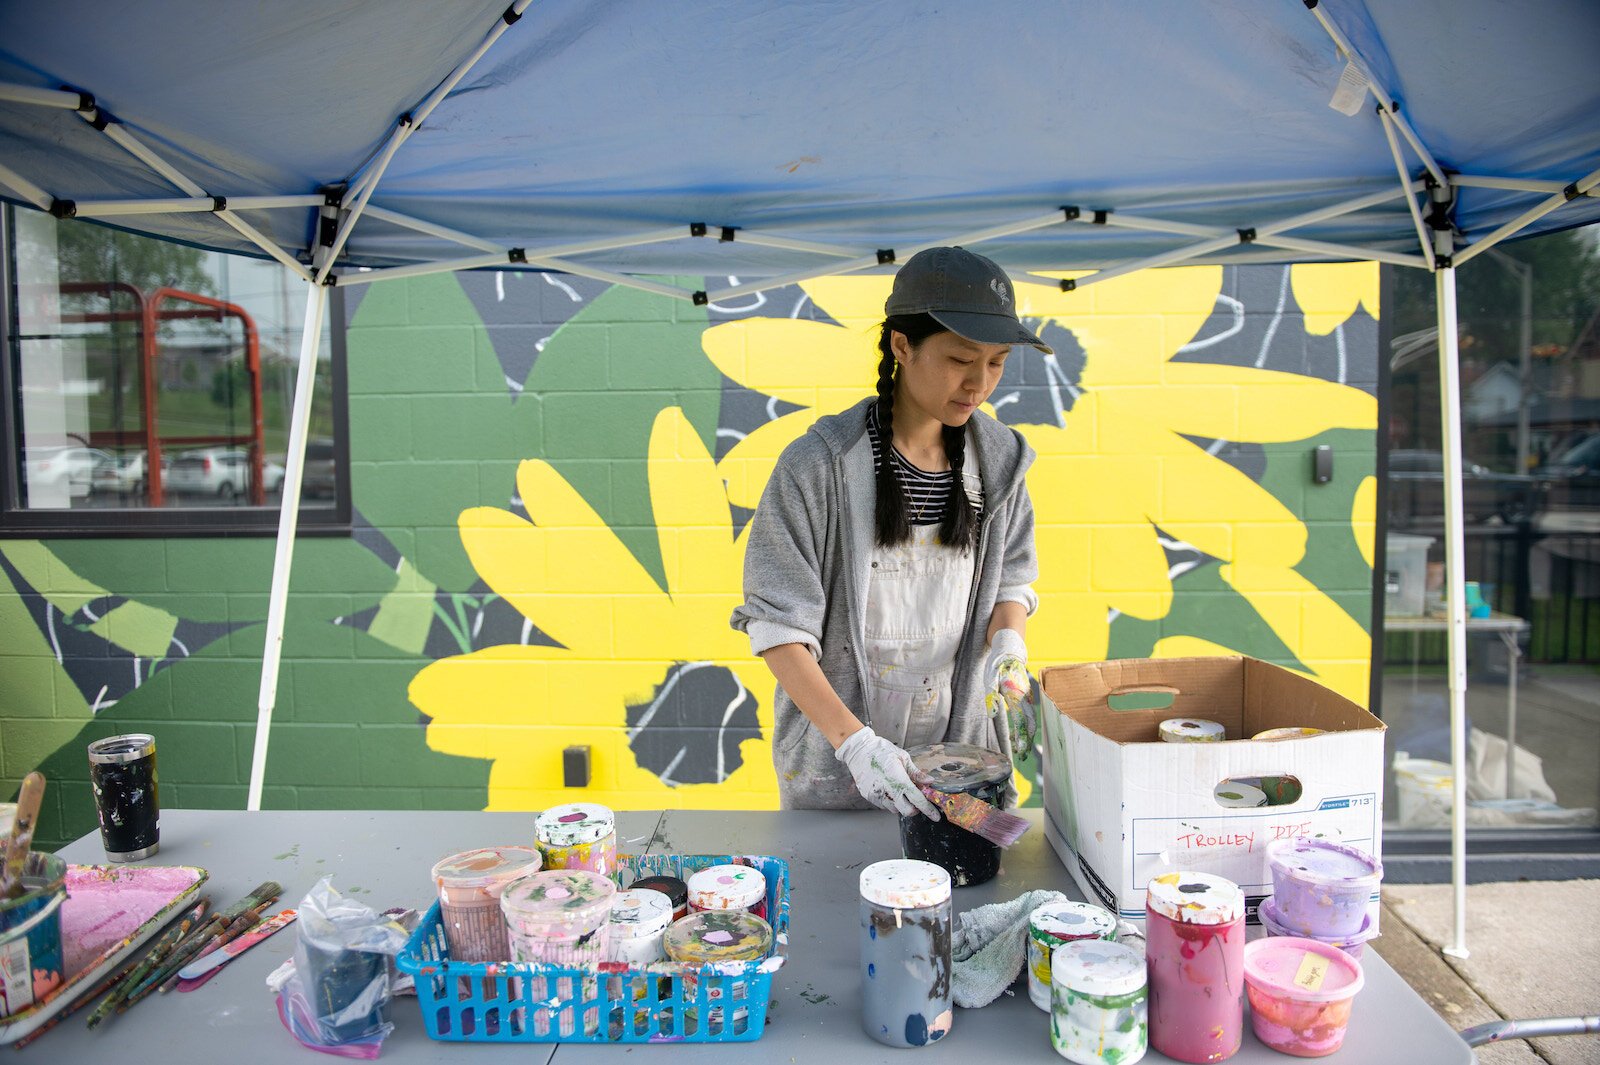 Detroit-based artist Louise 'Ouizi' Jones paints a mural in downtown Roanoke inspired by common Indiana flowers, including peonies and black-eyed Susans.